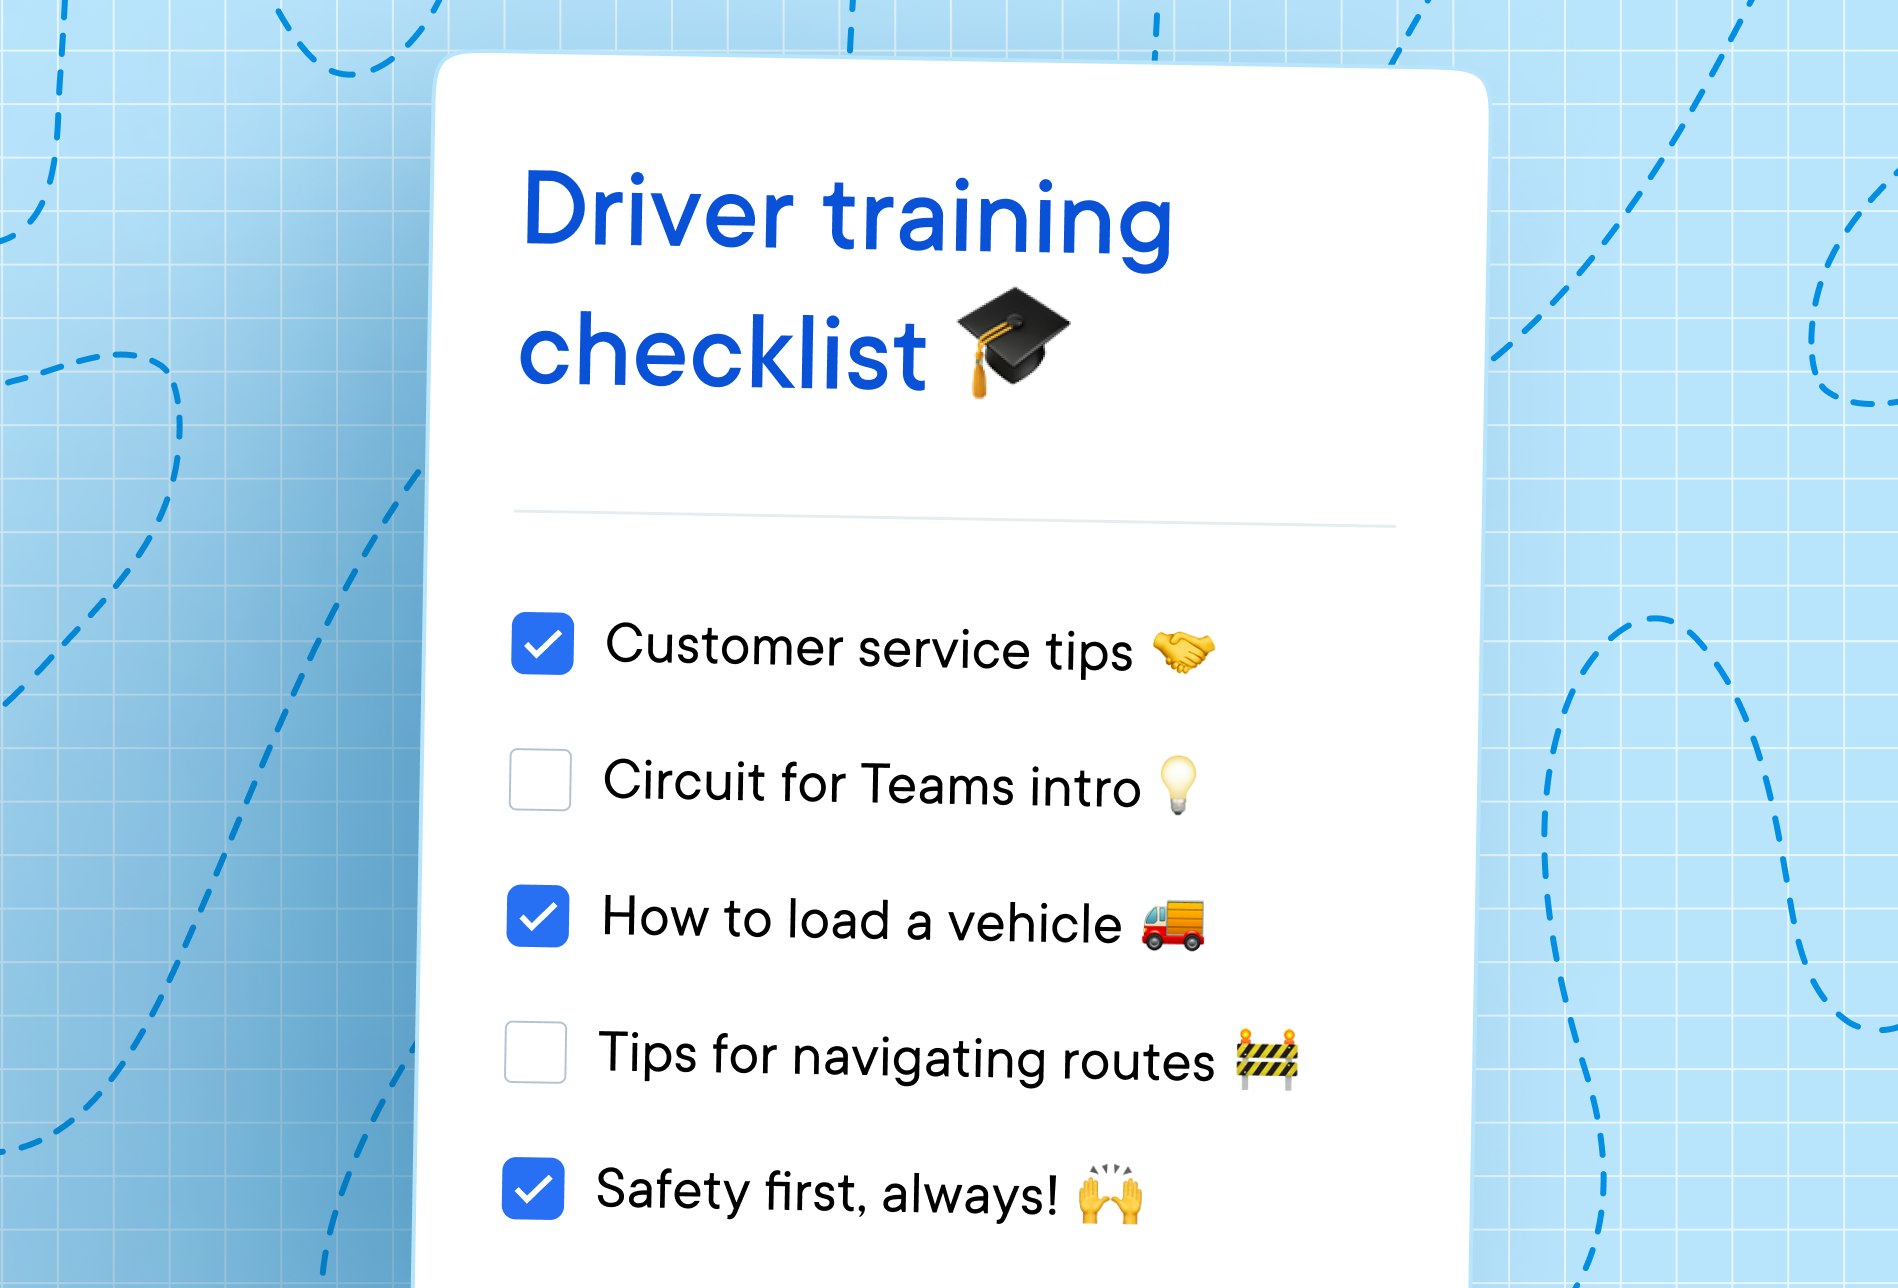 Driver training checklist: Customer service tips, Circuit for Teams intro, How to load a vehicle, Tips for navigating routes, Safety first.